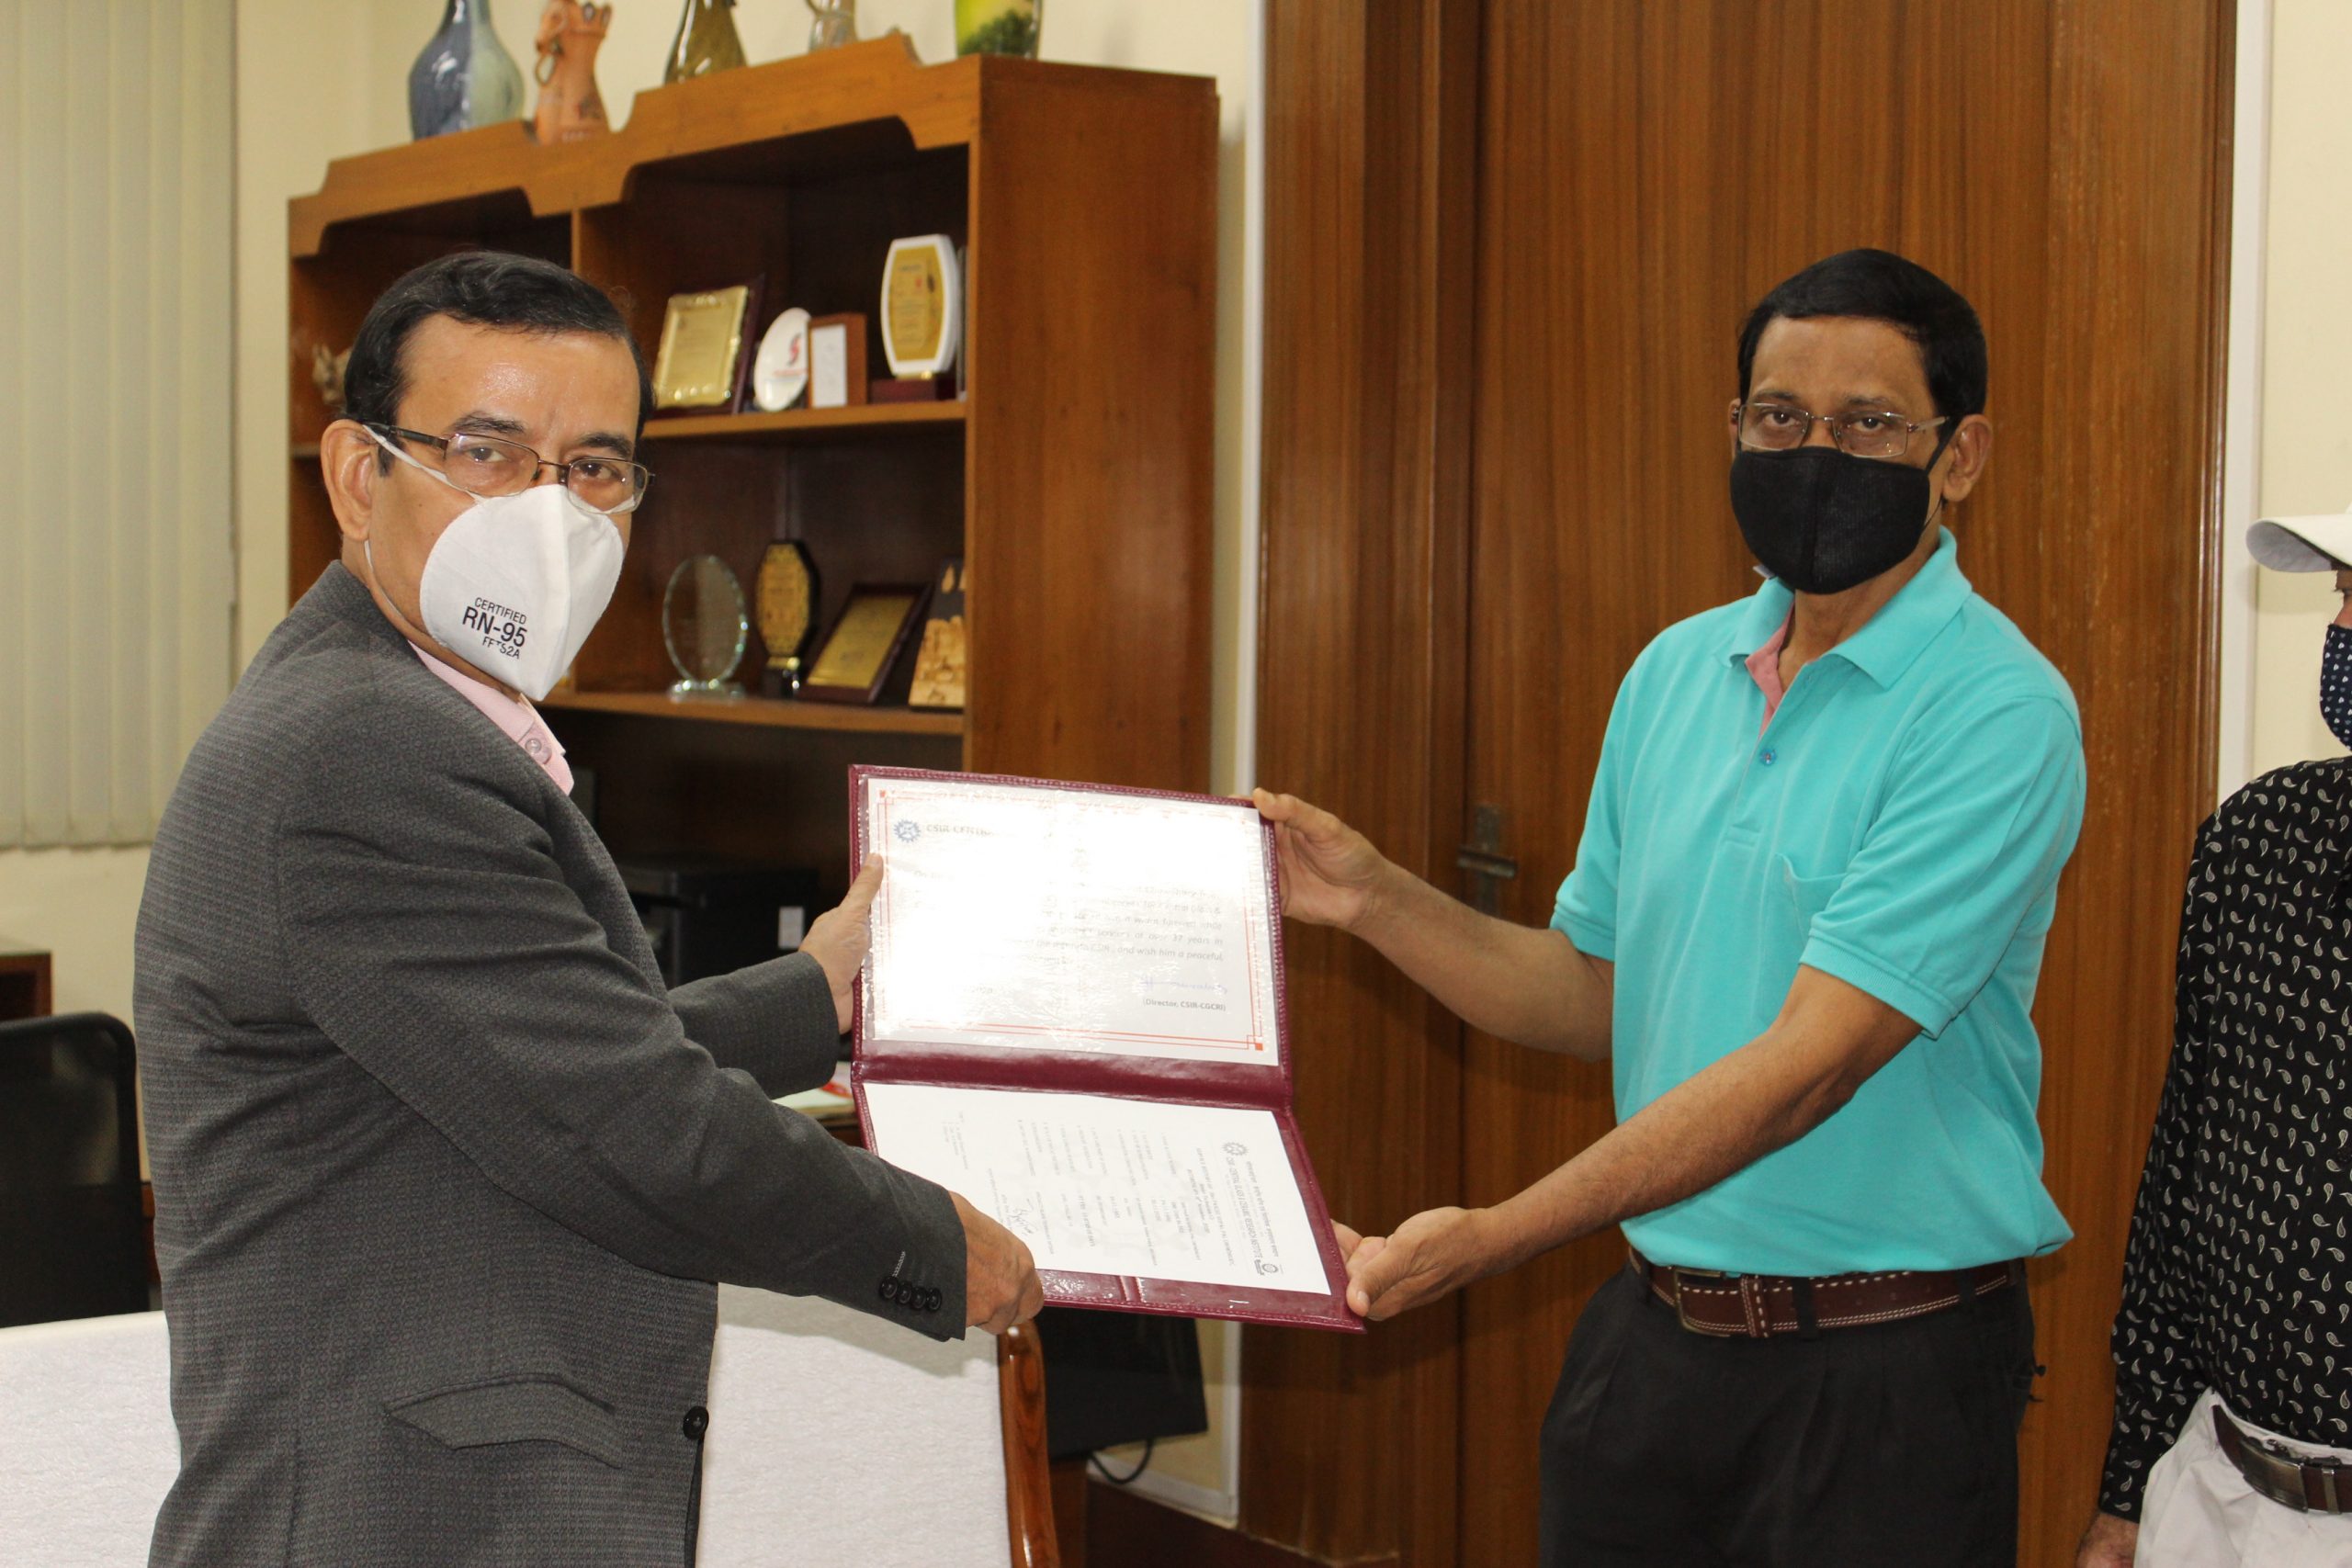 Acting Director presenting the Cetificate to Sri Panchu Gopal Pal Chowdhury, Senior Technician (2) upon superannuation from Council Service in November, 2020